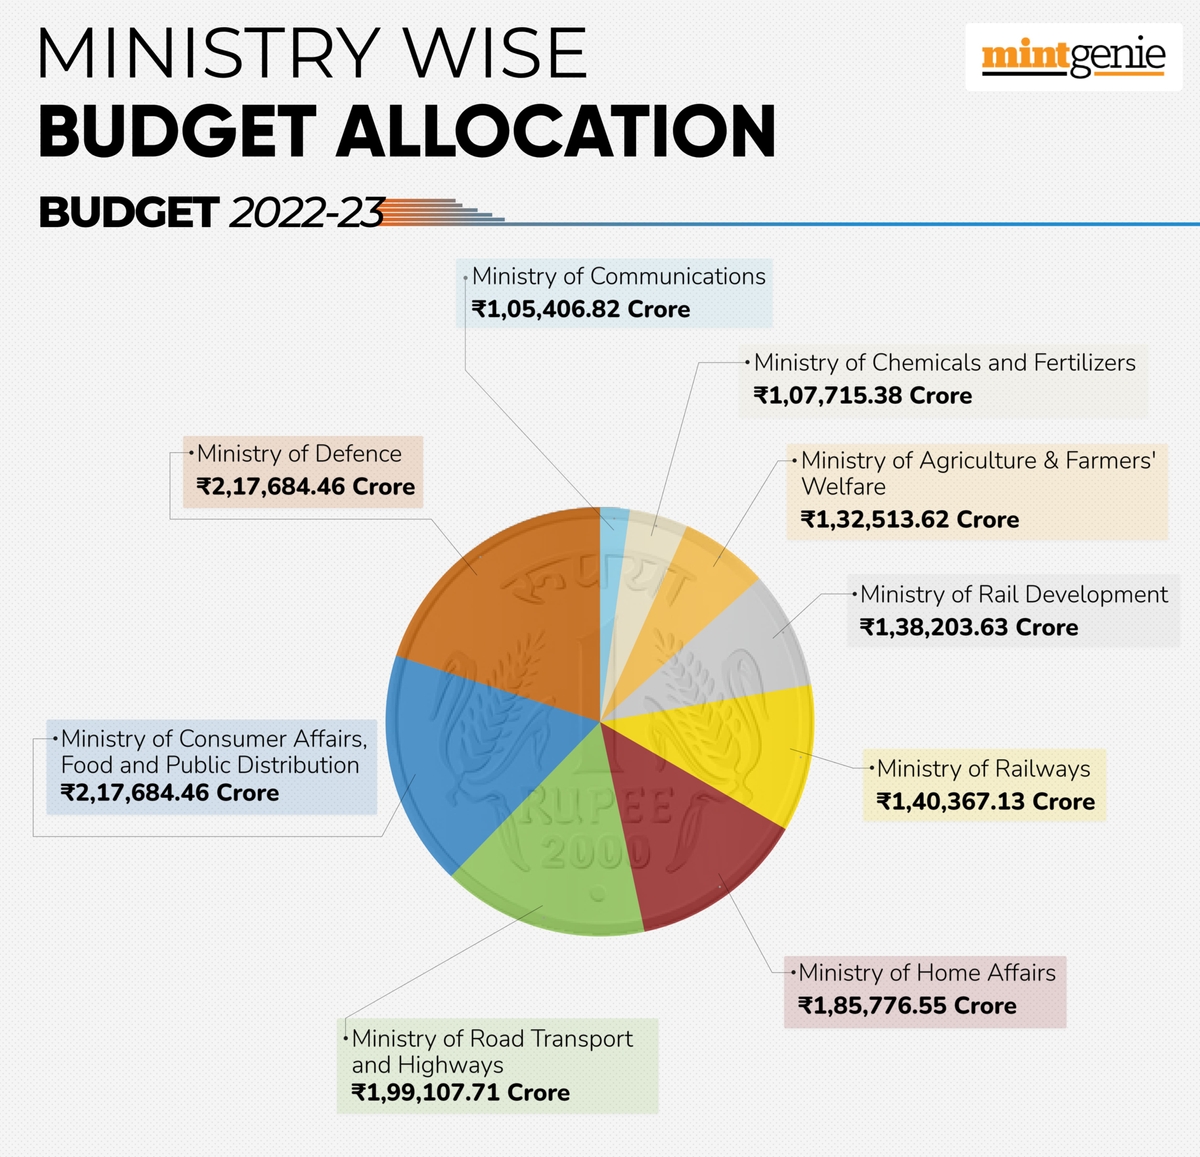 ministry-wise-budget-allocation-2022-23